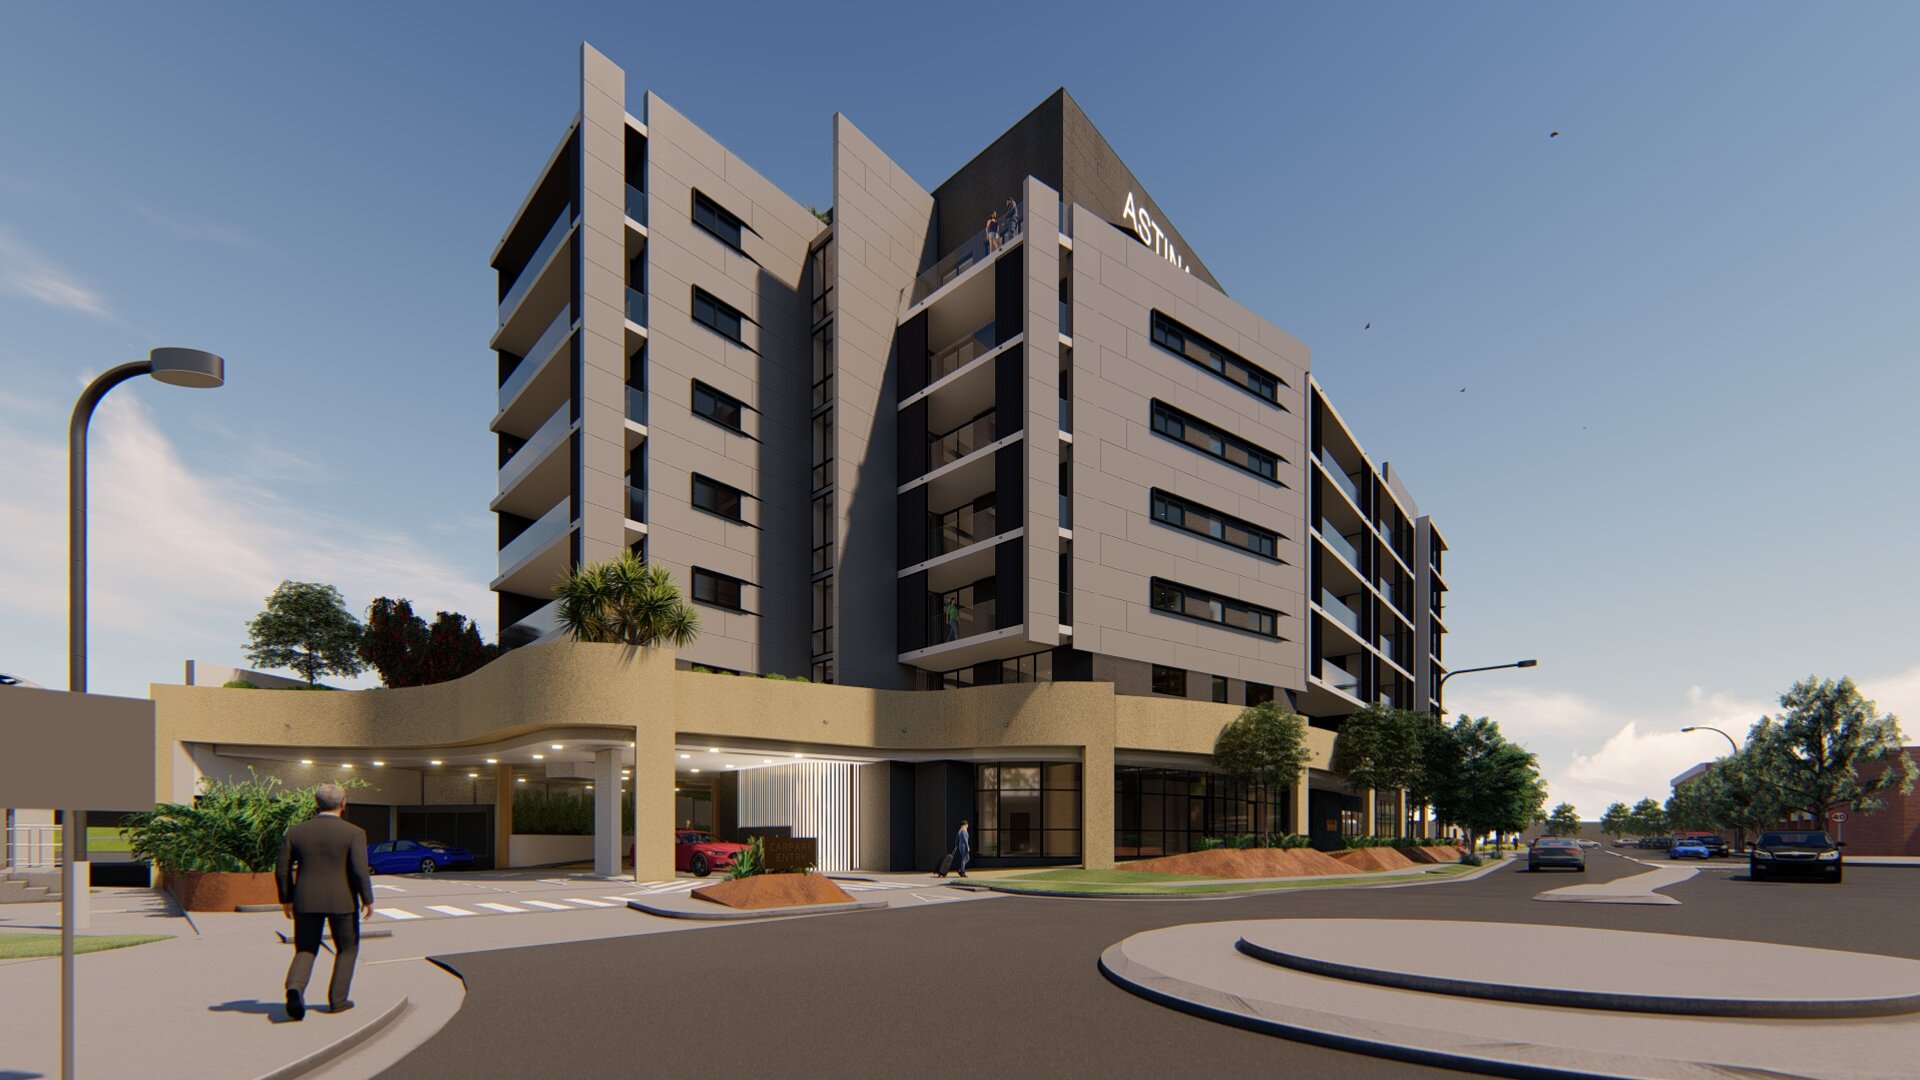 Astina Suites Penrith — Morson Group Architects Project Managers